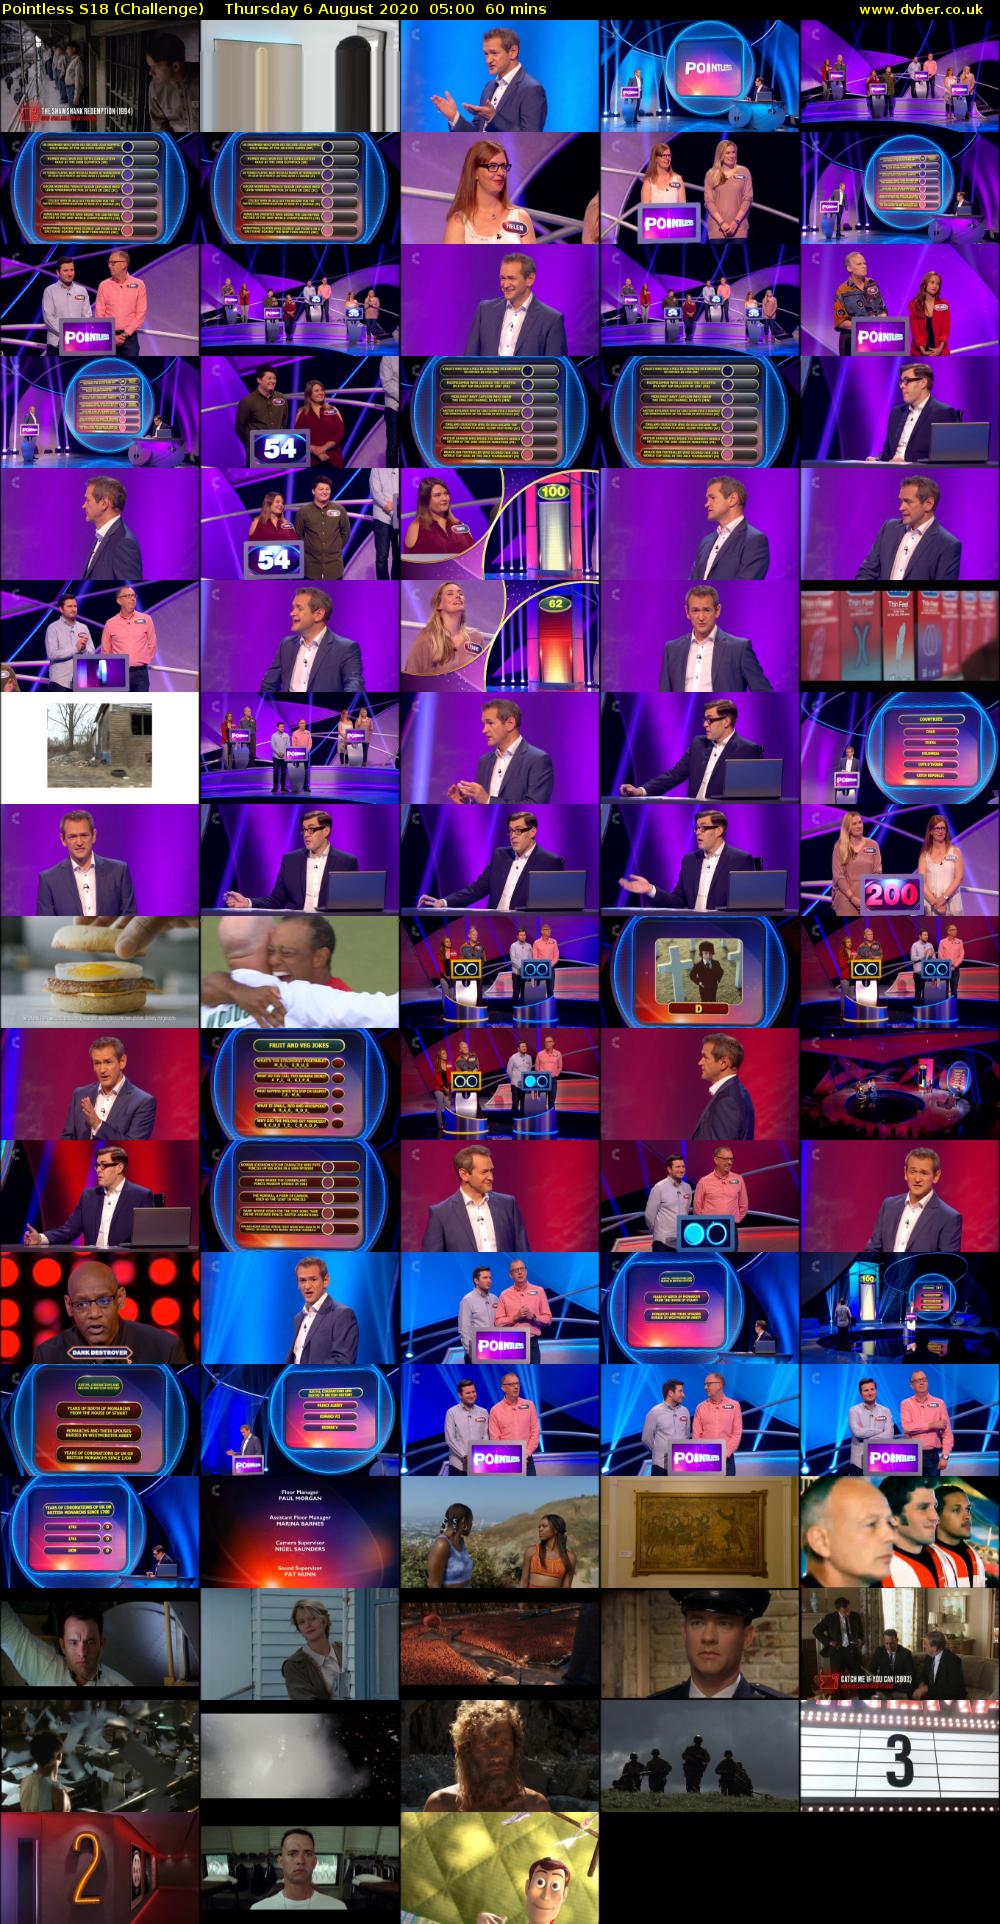 Pointless S18 (Challenge) Thursday 6 August 2020 05:00 - 06:00